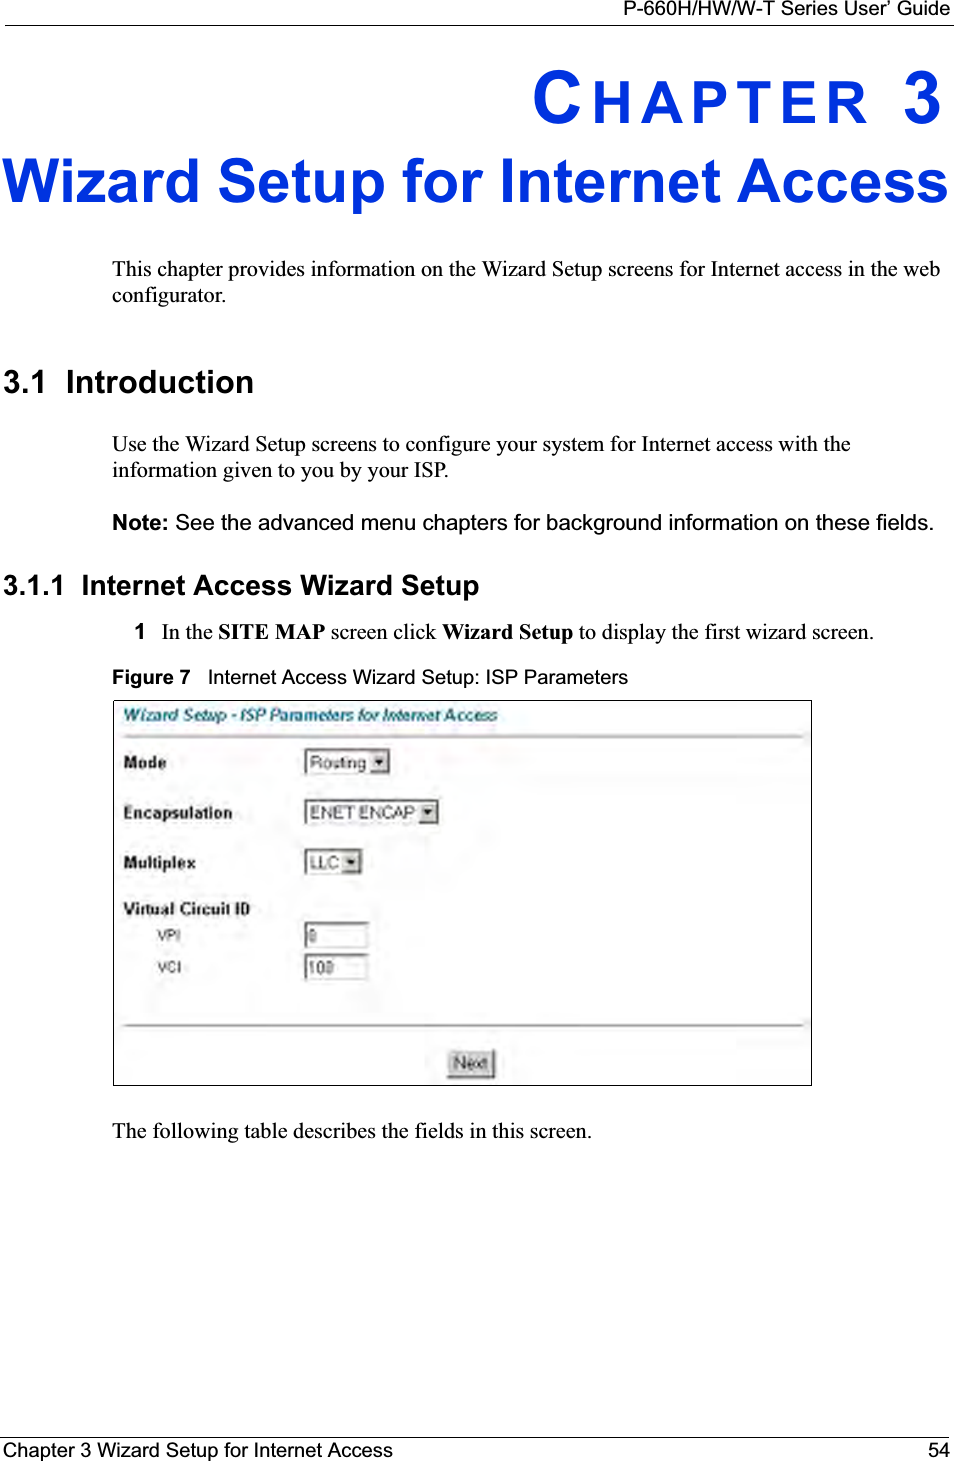 P-660H/HW/W-T Series User’ GuideChapter 3 Wizard Setup for Internet Access 54CHAPTER 3Wizard Setup for Internet AccessThis chapter provides information on the Wizard Setup screens for Internet access in the web configurator.3.1  IntroductionUse the Wizard Setup screens to configure your system for Internet access with the information given to you by your ISP. Note: See the advanced menu chapters for background information on these fields.3.1.1  Internet Access Wizard Setup1 In the SITE MAP screen click Wizard Setup to display the first wizard screen. Figure 7   Internet Access Wizard Setup: ISP ParametersThe following table describes the fields in this screen.